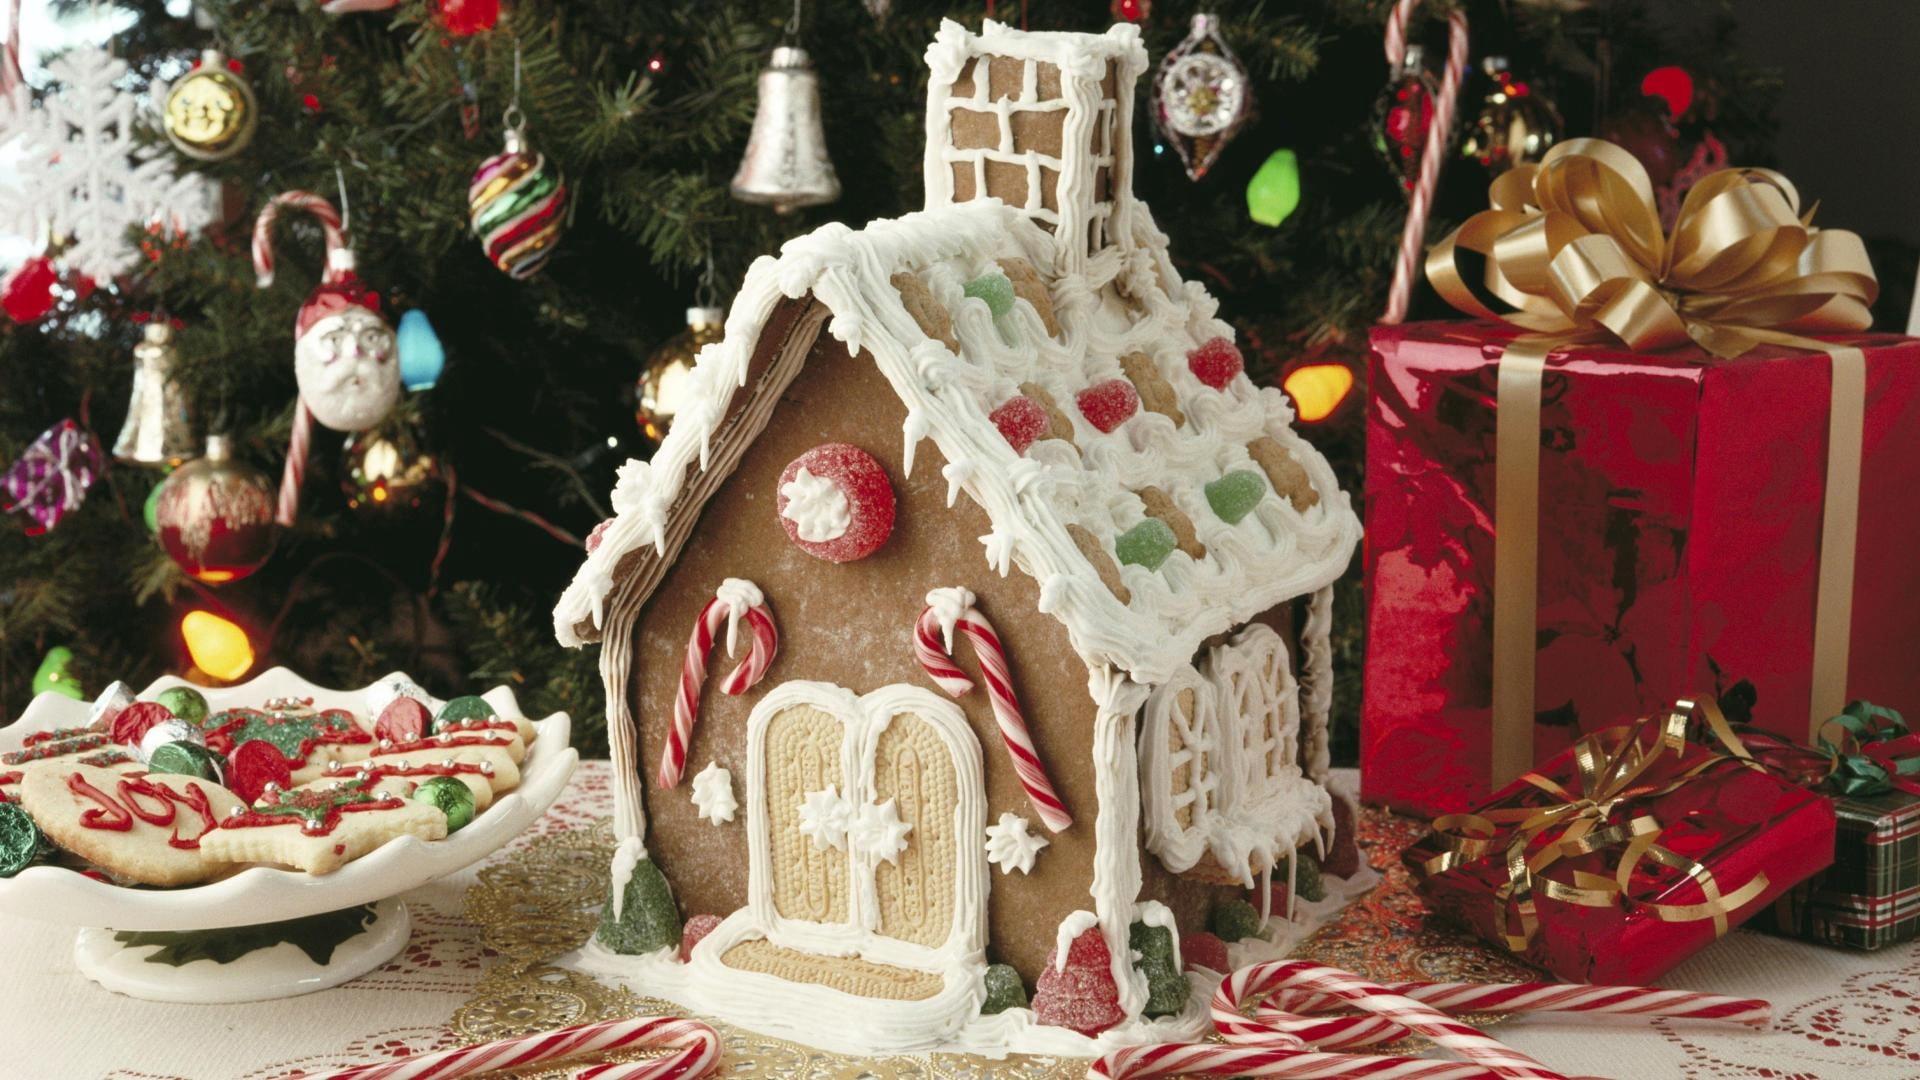 gingerbread house, camping, food, sweet, cookies, christmas, decoration